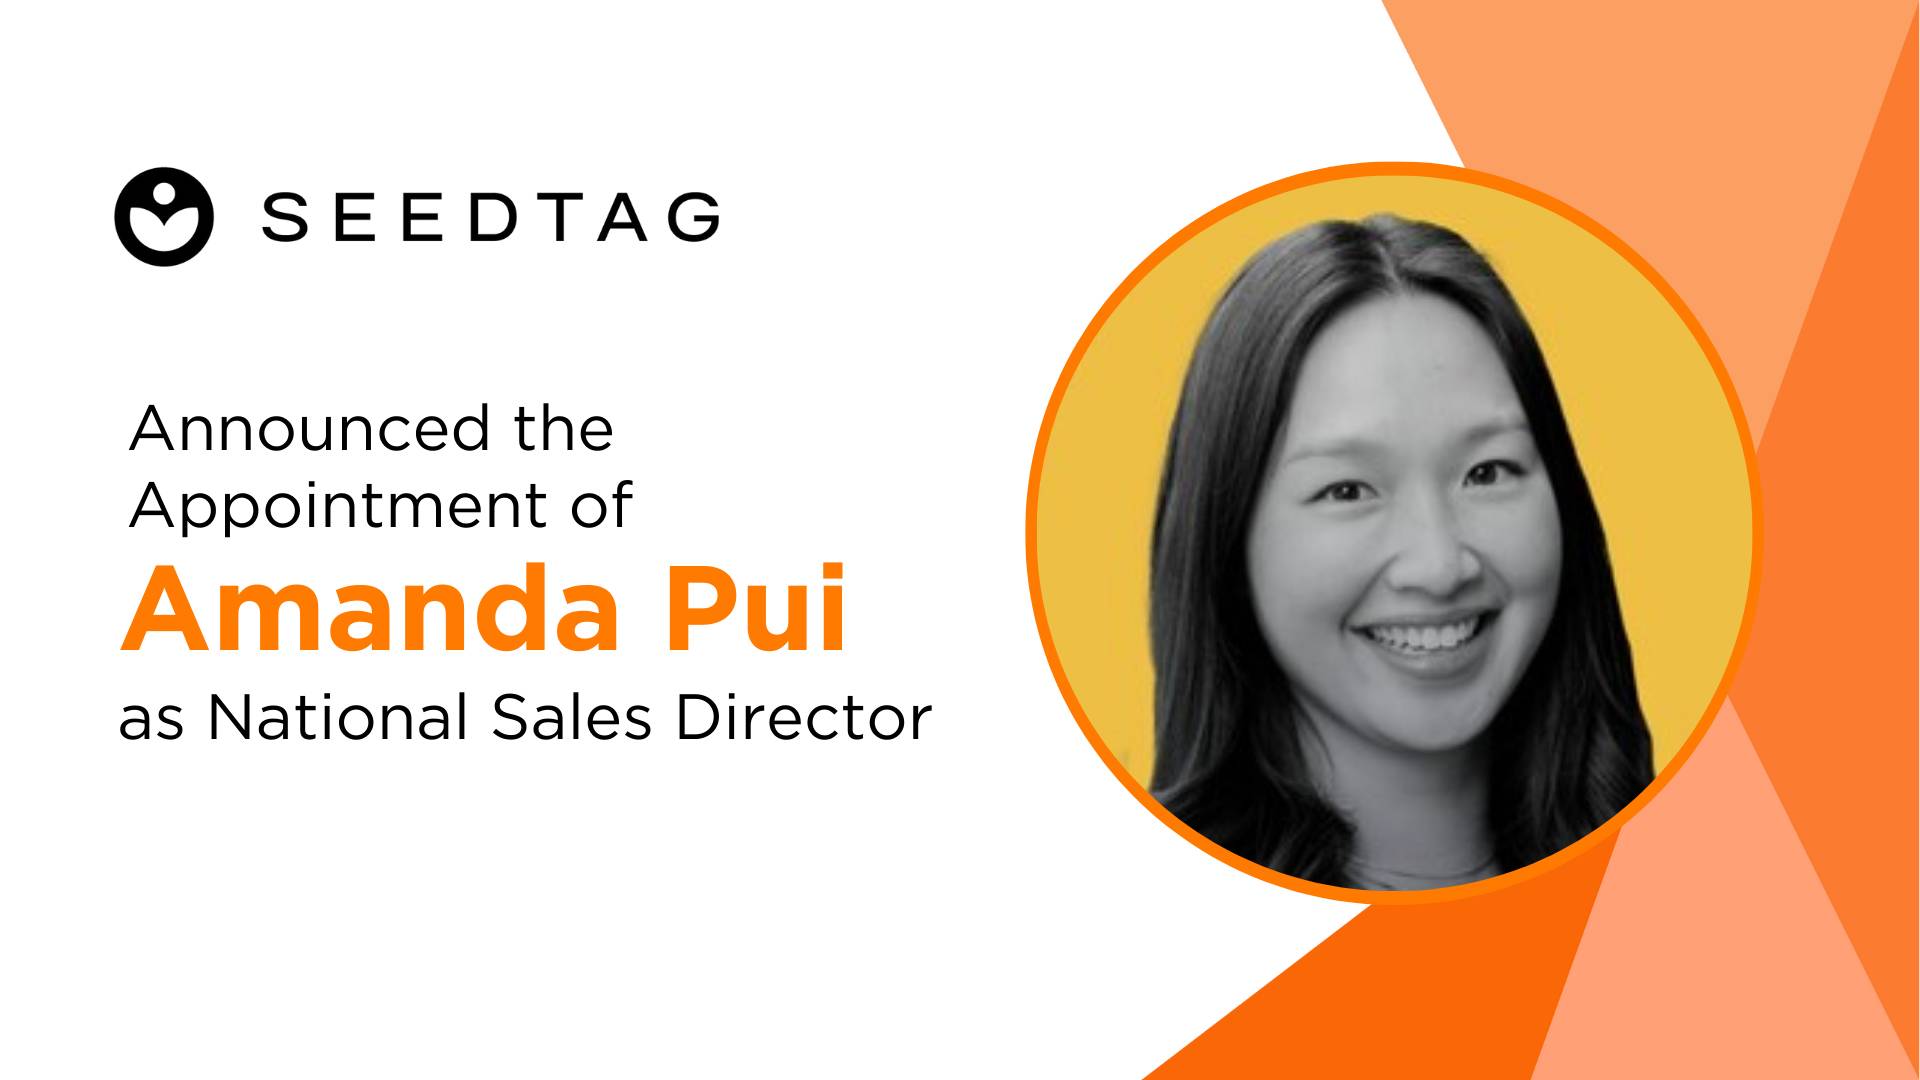 Seedtag Expands to Canada: Amanda Pui Appointed National Sales Director